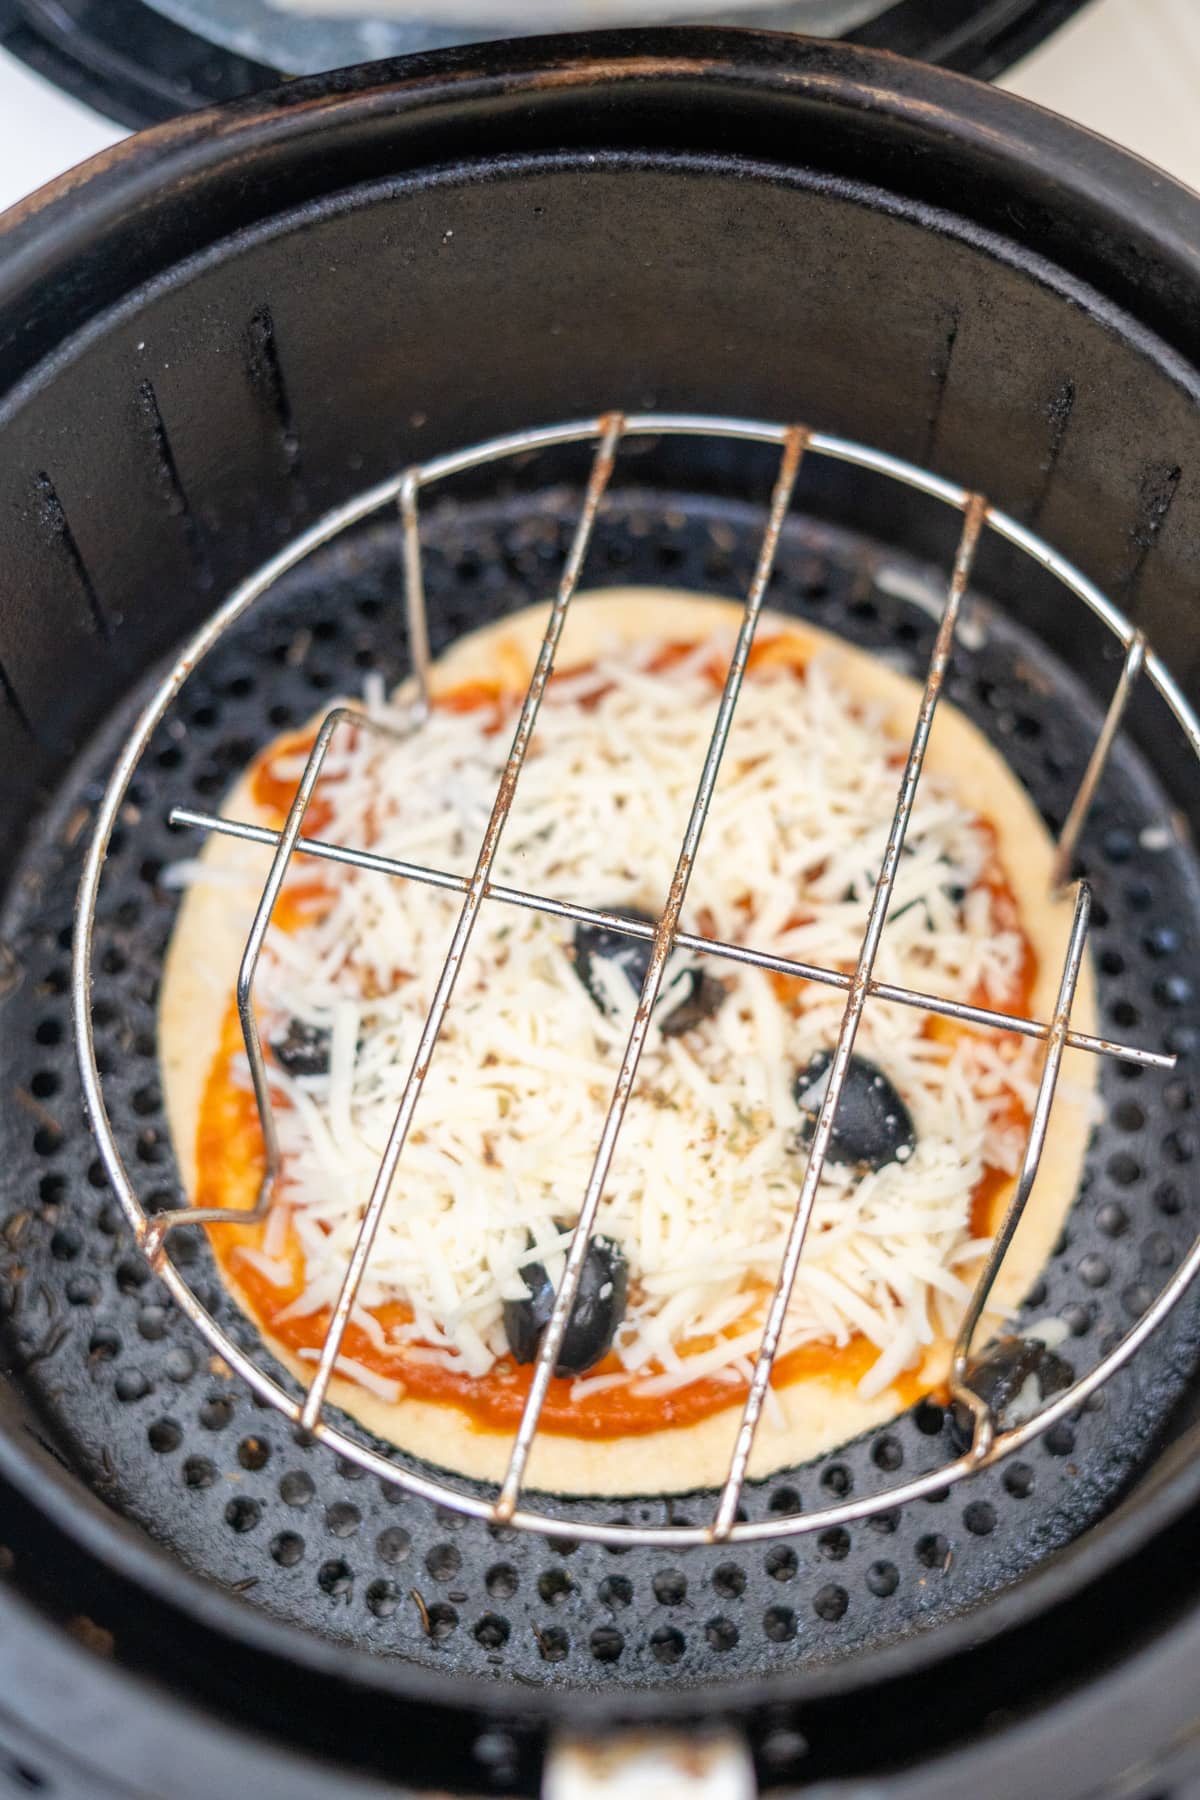 A tortilla pizza is being cooked in an air fryer.